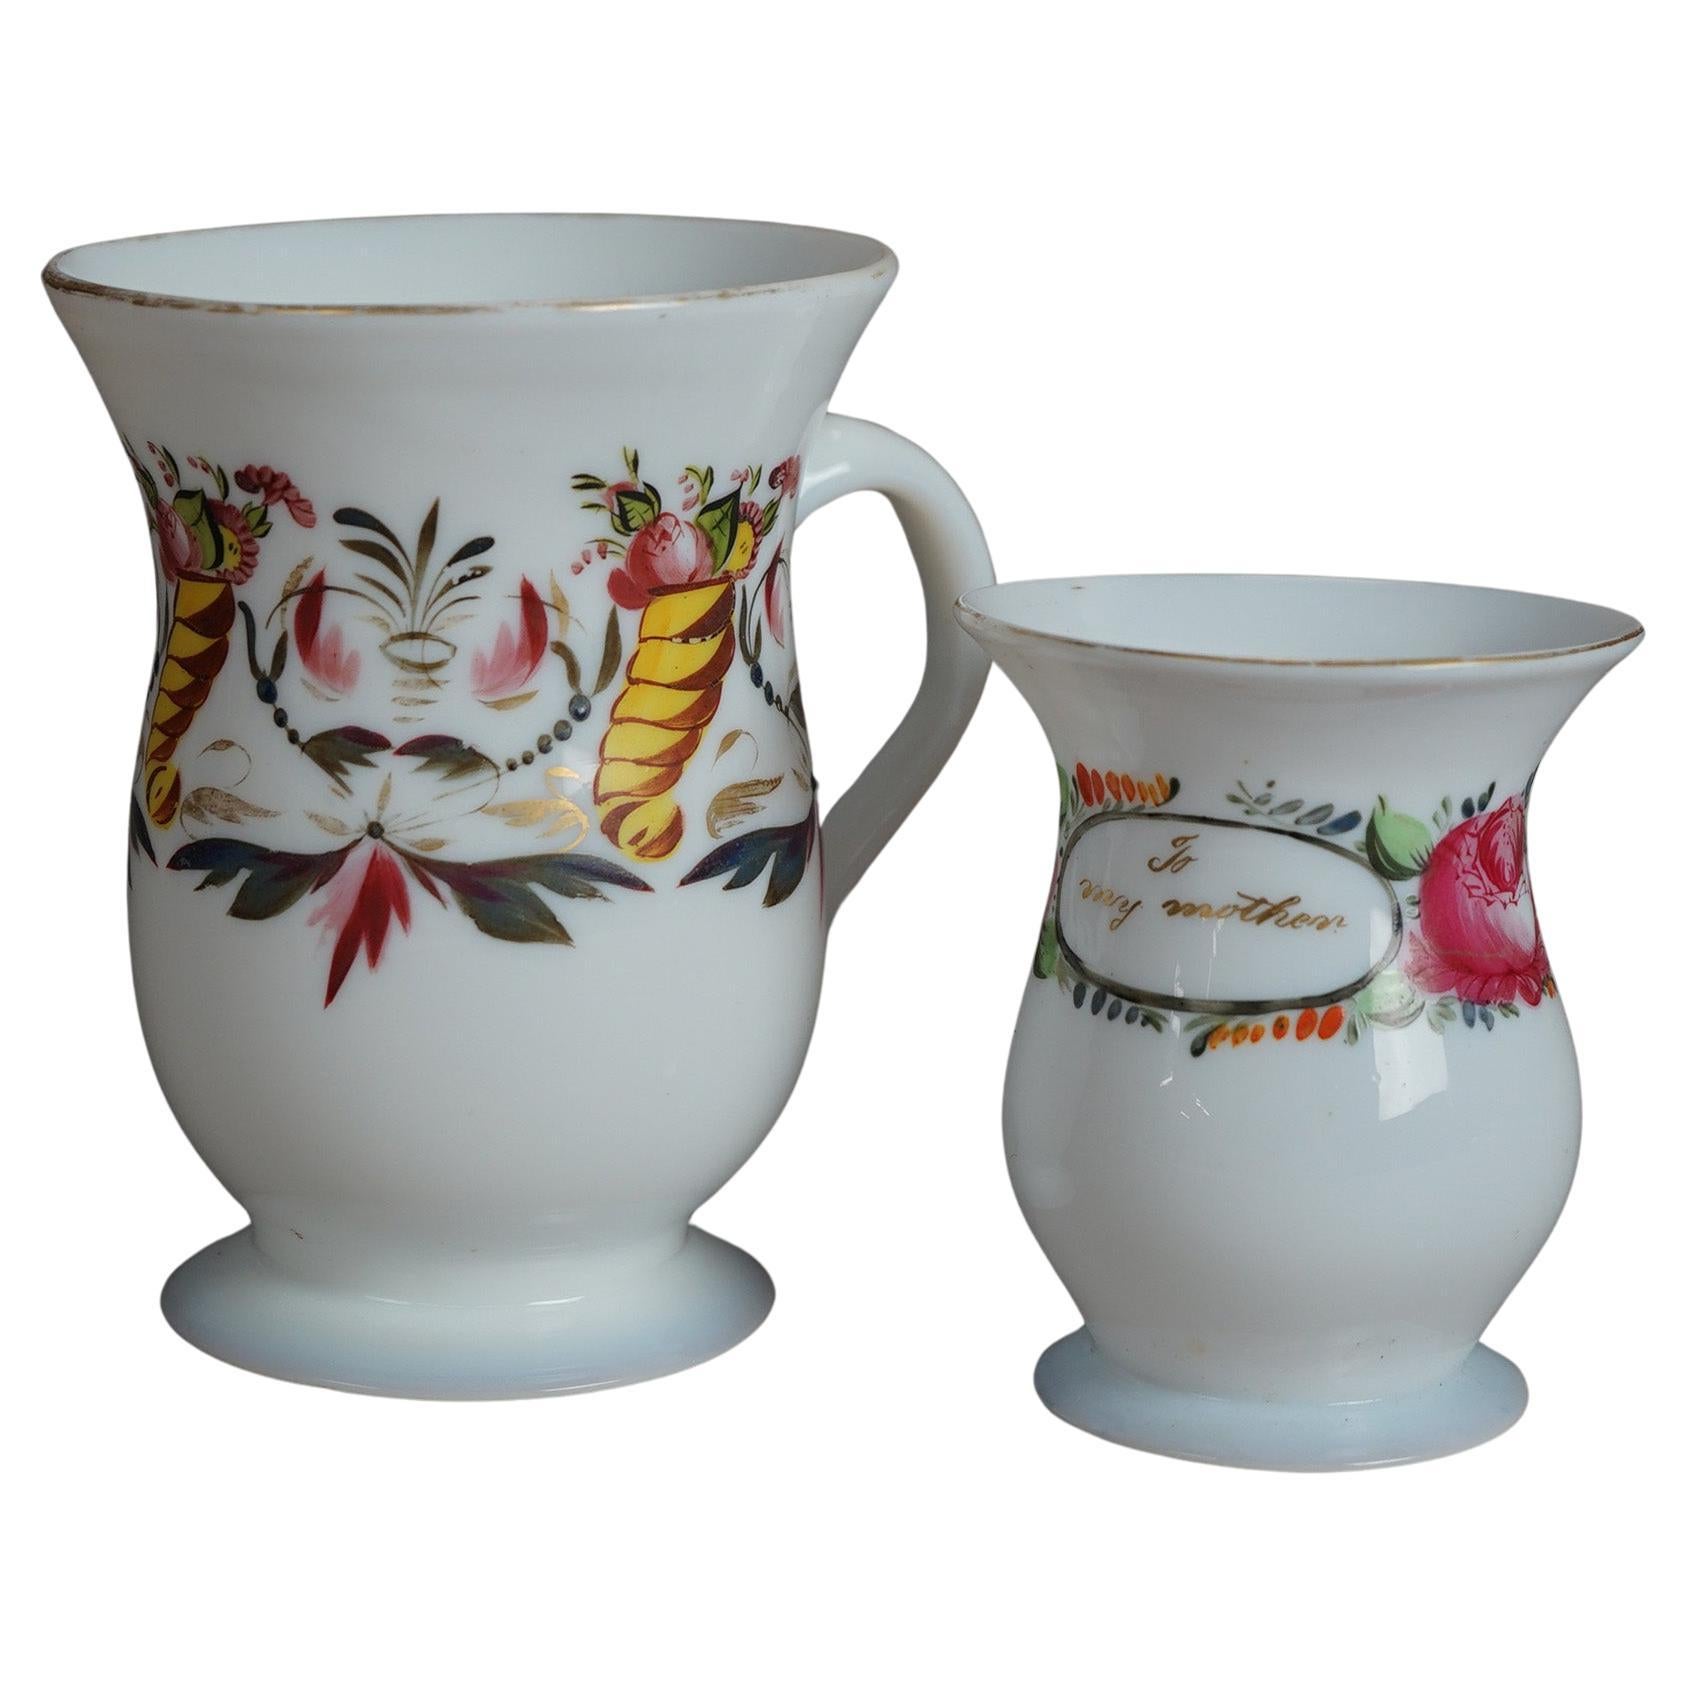 Two early antique opaline glass mugs offer hand enameled and gilt decoration, 18th century

Measures - Smaller 4.25